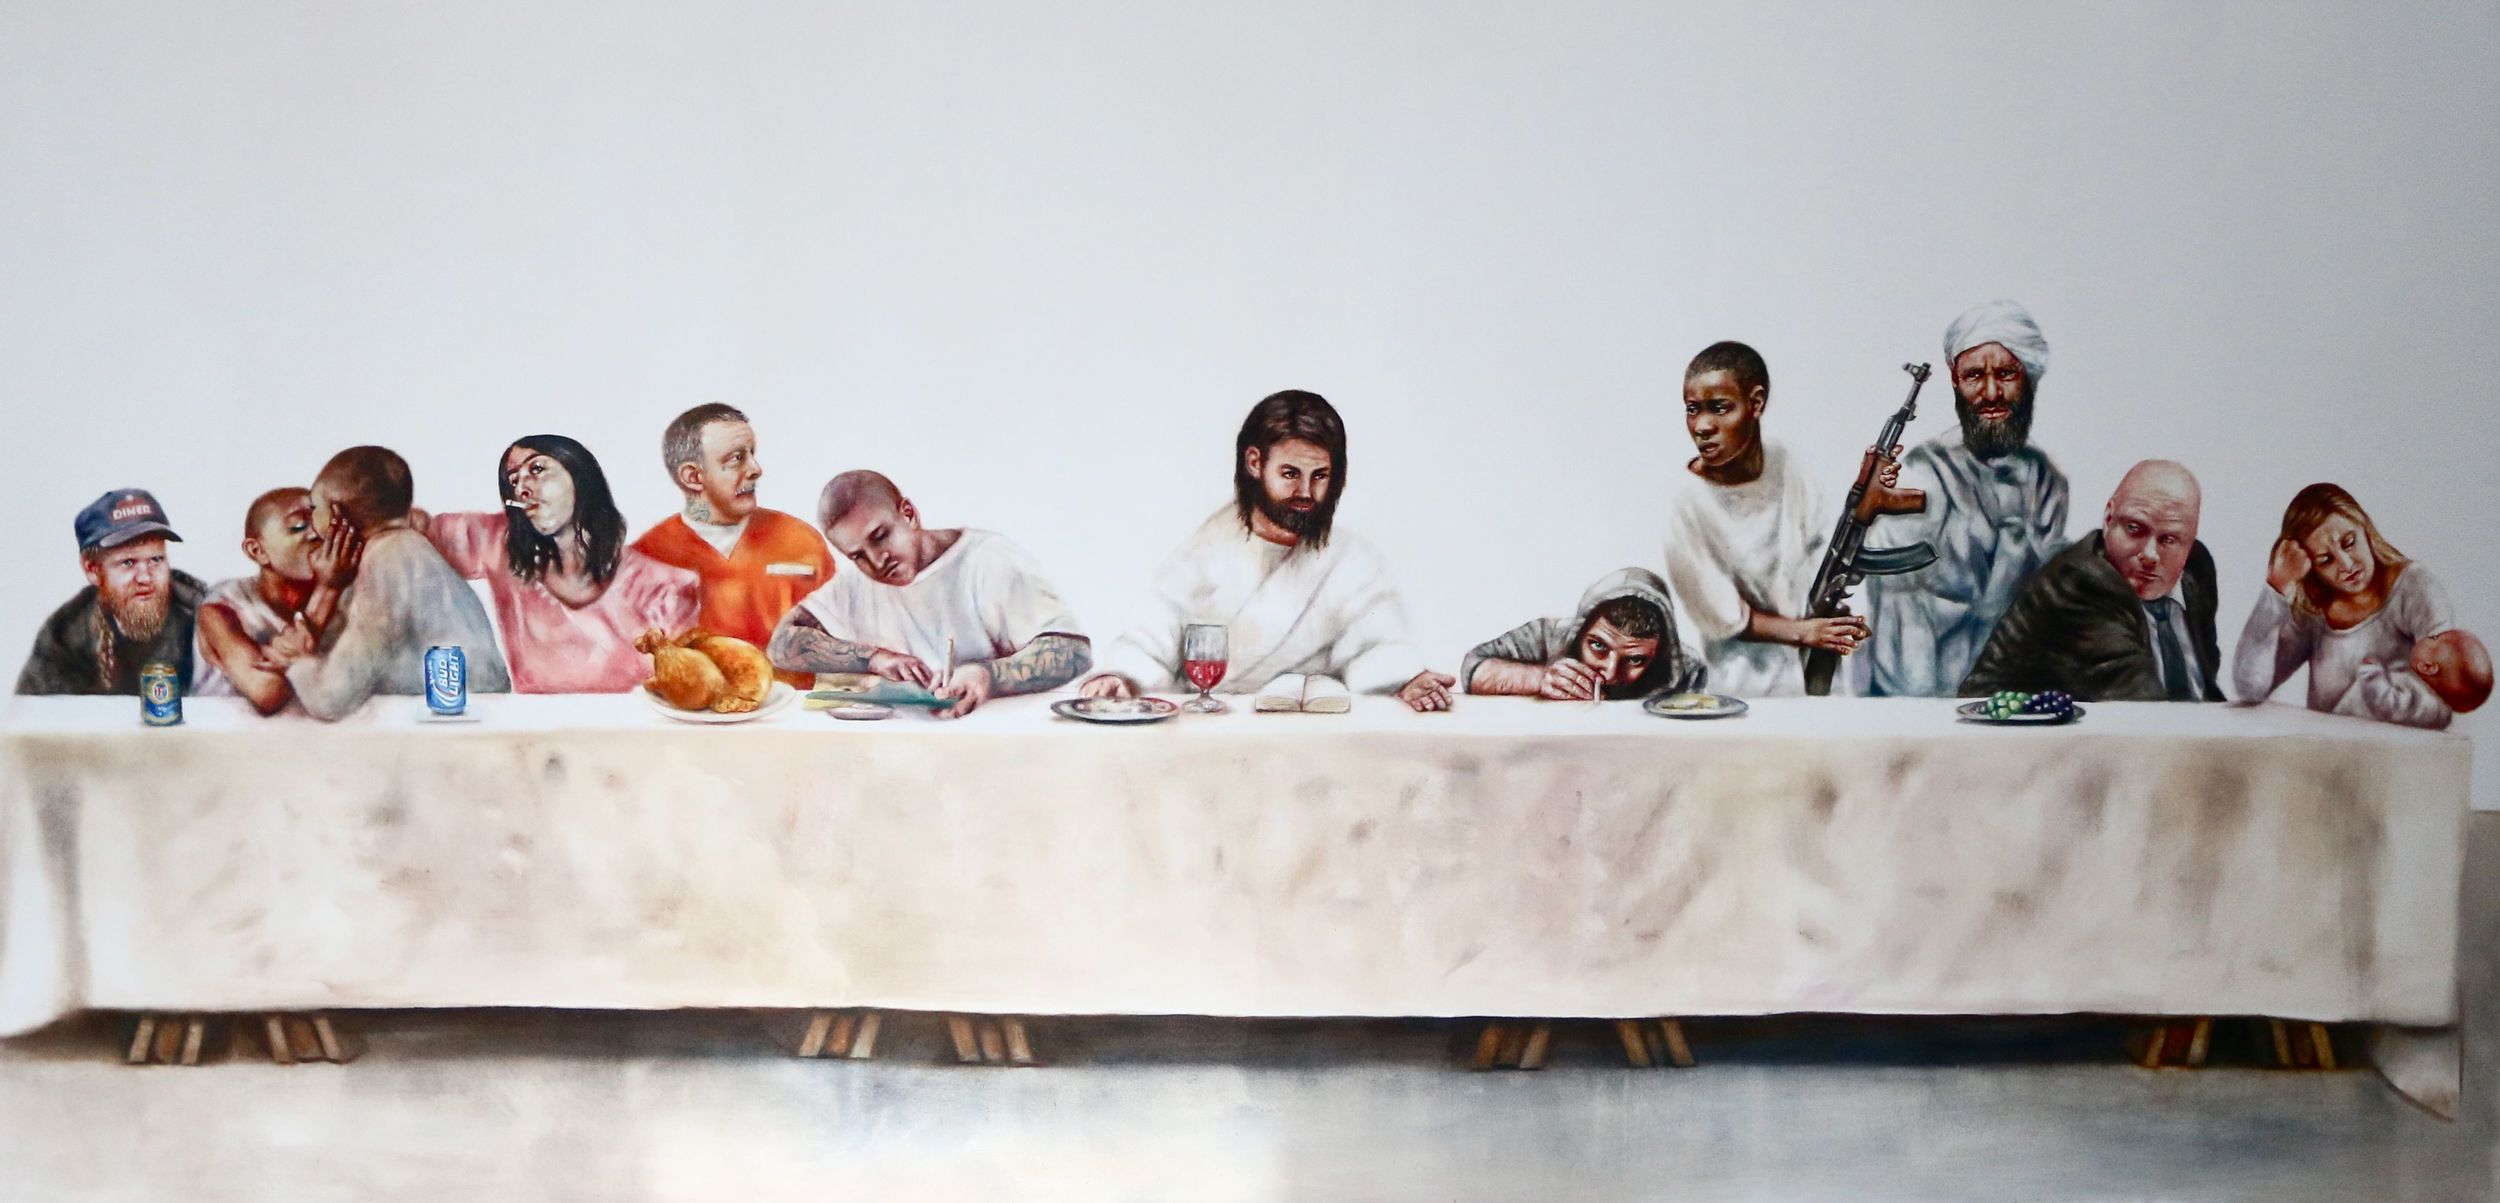 Last Supper Giclée Print - from $144.00